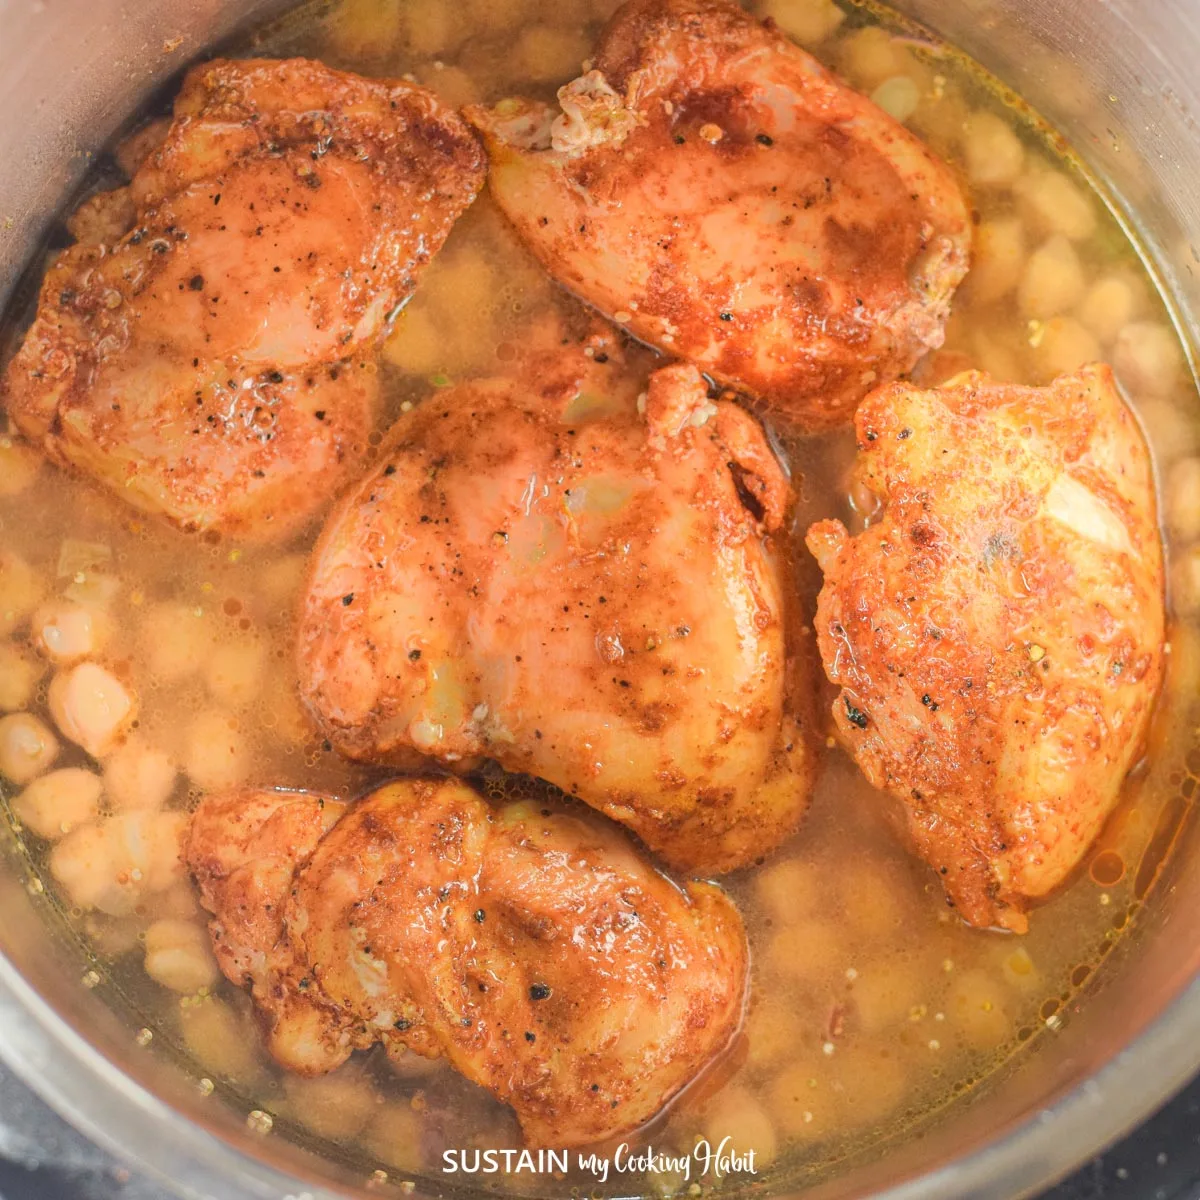 Adding cooked chicken thighs into the broth.